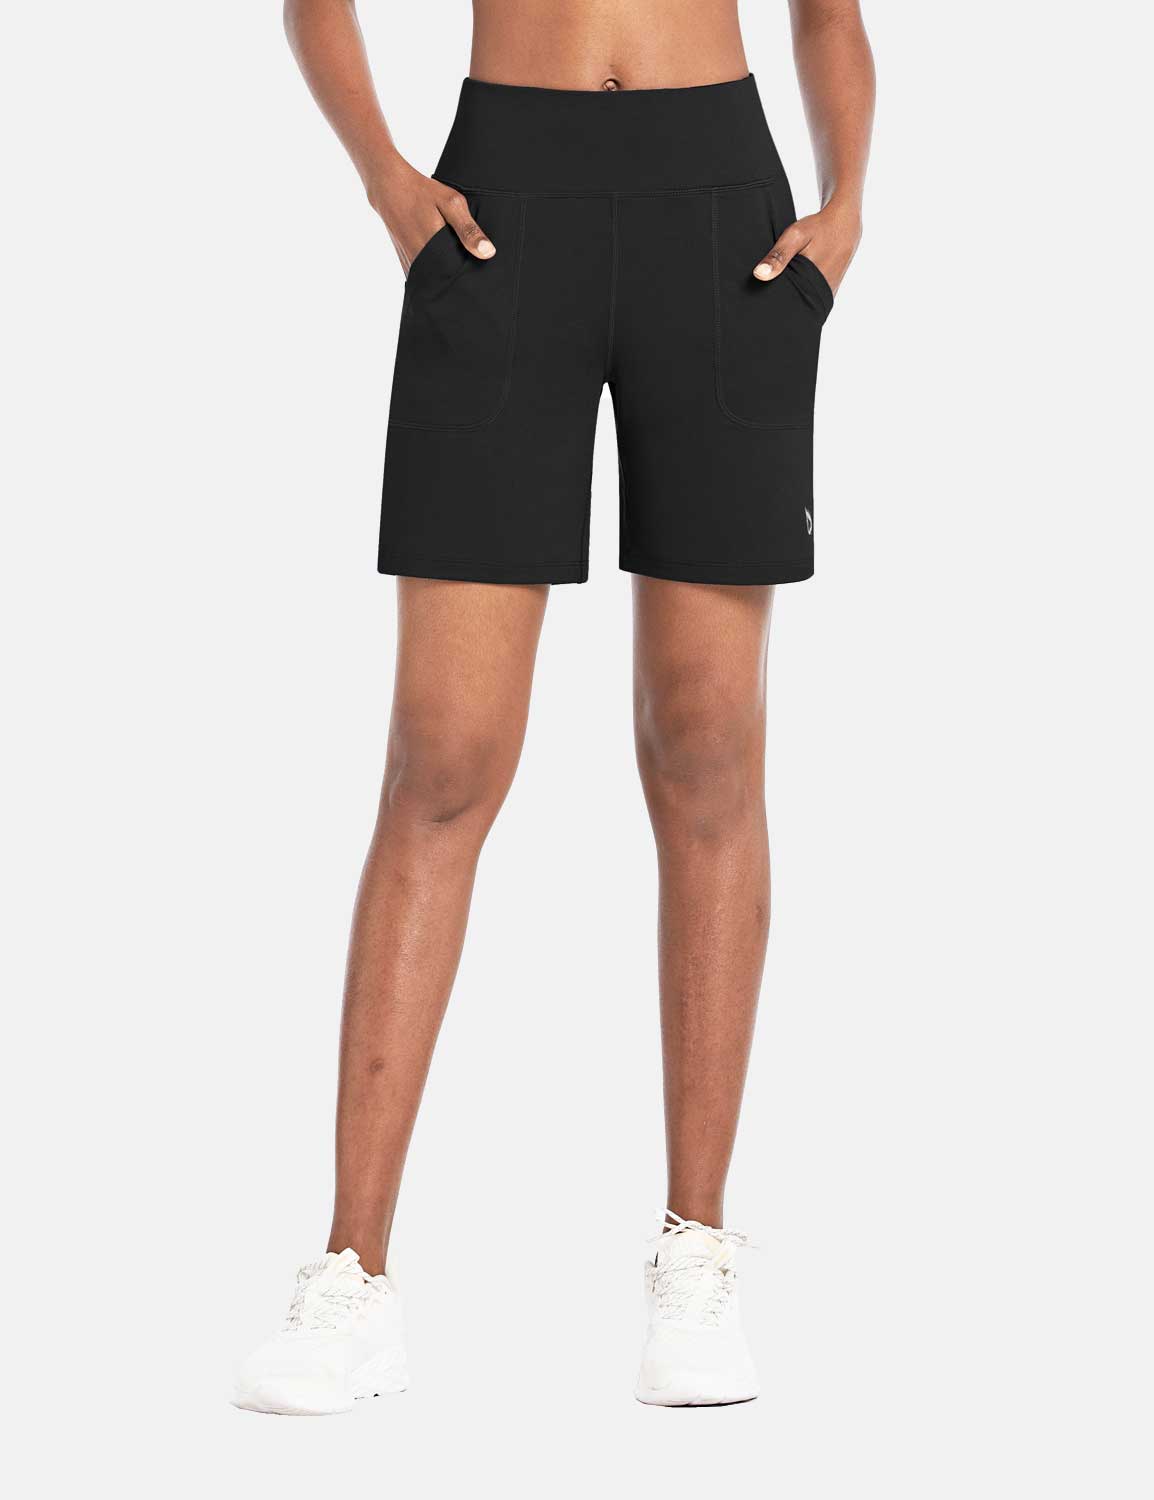 Baleaf Women's High Rise Athletic Relaxed Fit Pocketed Shorts Black Main